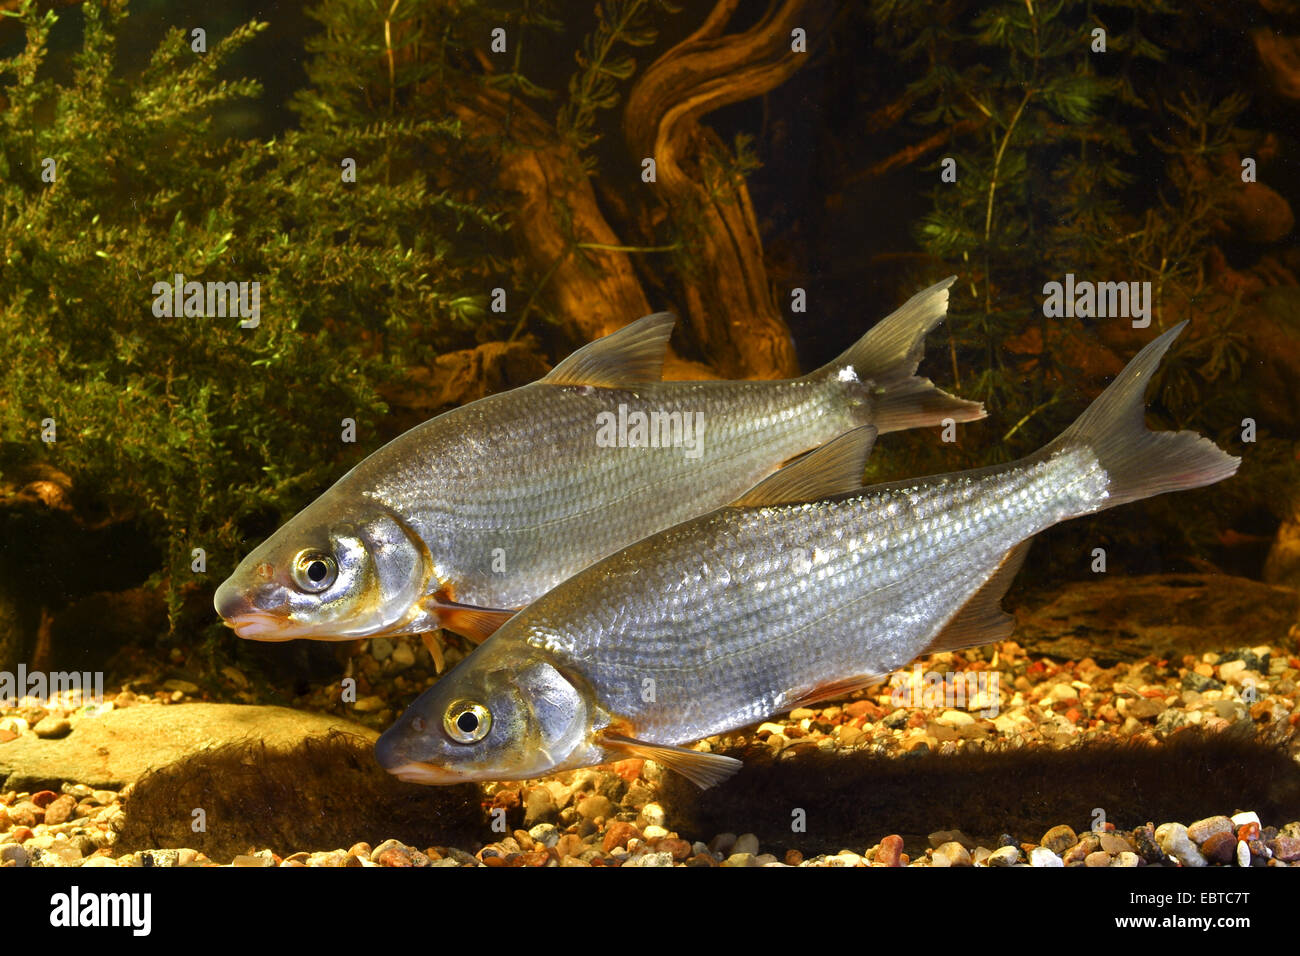 East European bream, zaehrte, Baltic vimba, Vimba bream, Vimba, Zanthe, Zarte (Vimba vimba, Abramis vimba), two fishes at the bottom of a river covered with gravel and waterplants Stock Photo